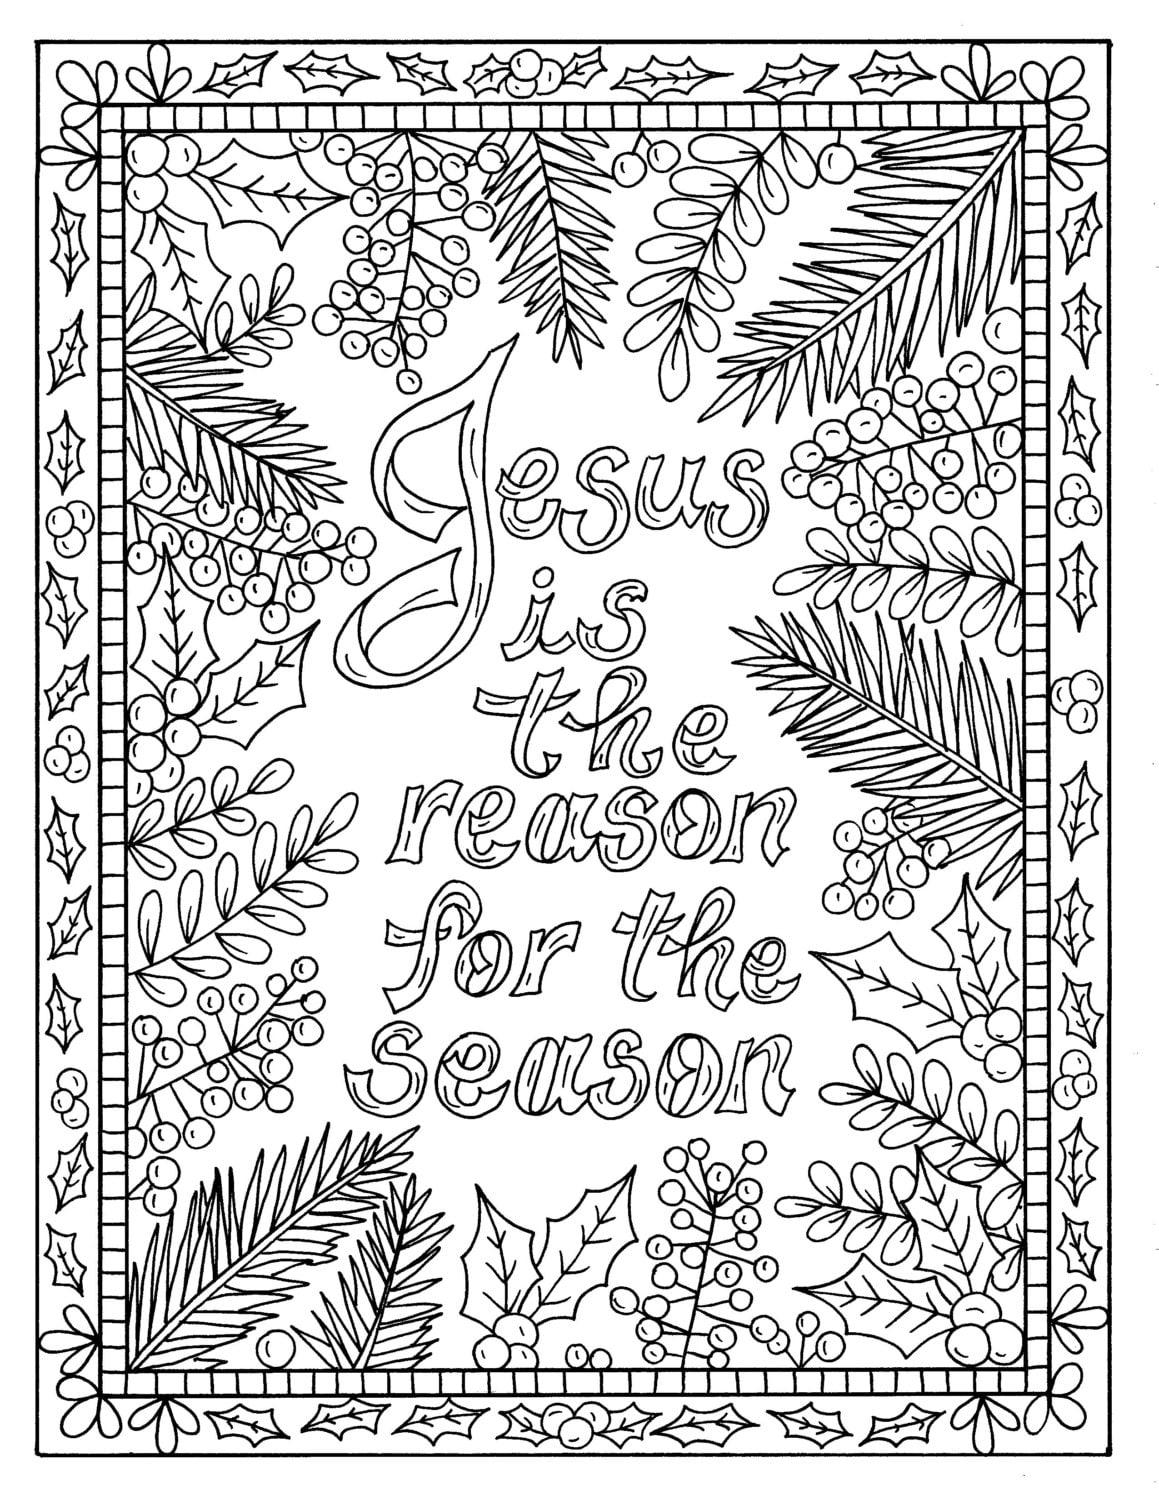 5-christian-coloring-pages-for-christmas-color-book-digital